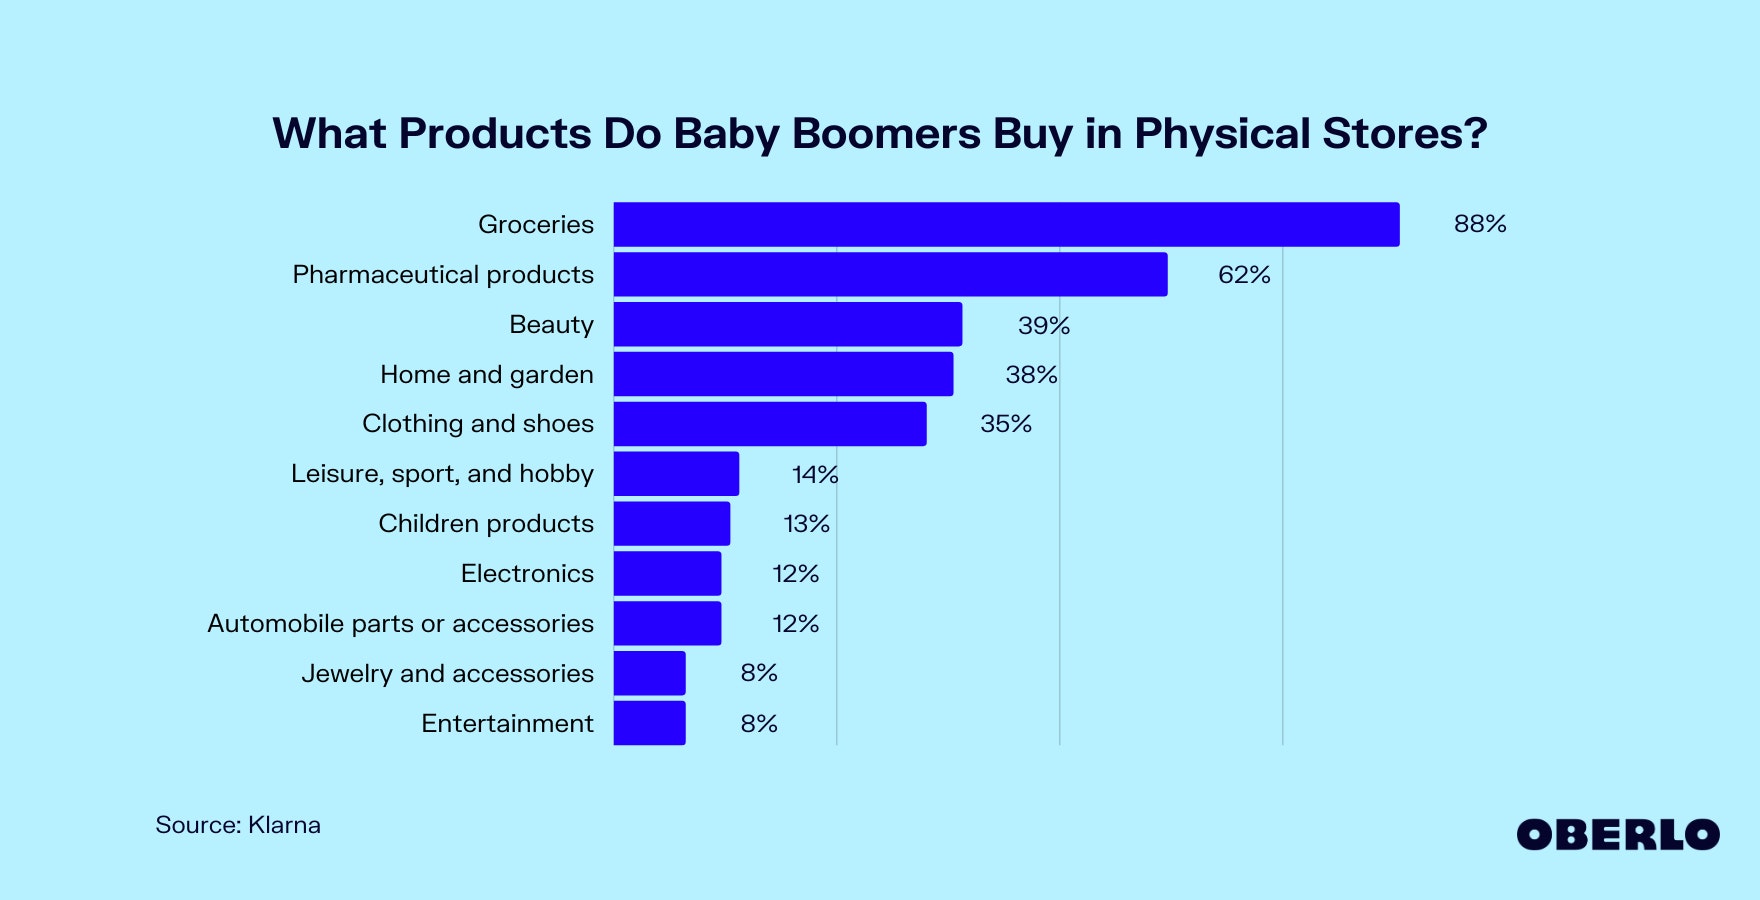 Chart showing: What products do baby boomers buy in physical stores?